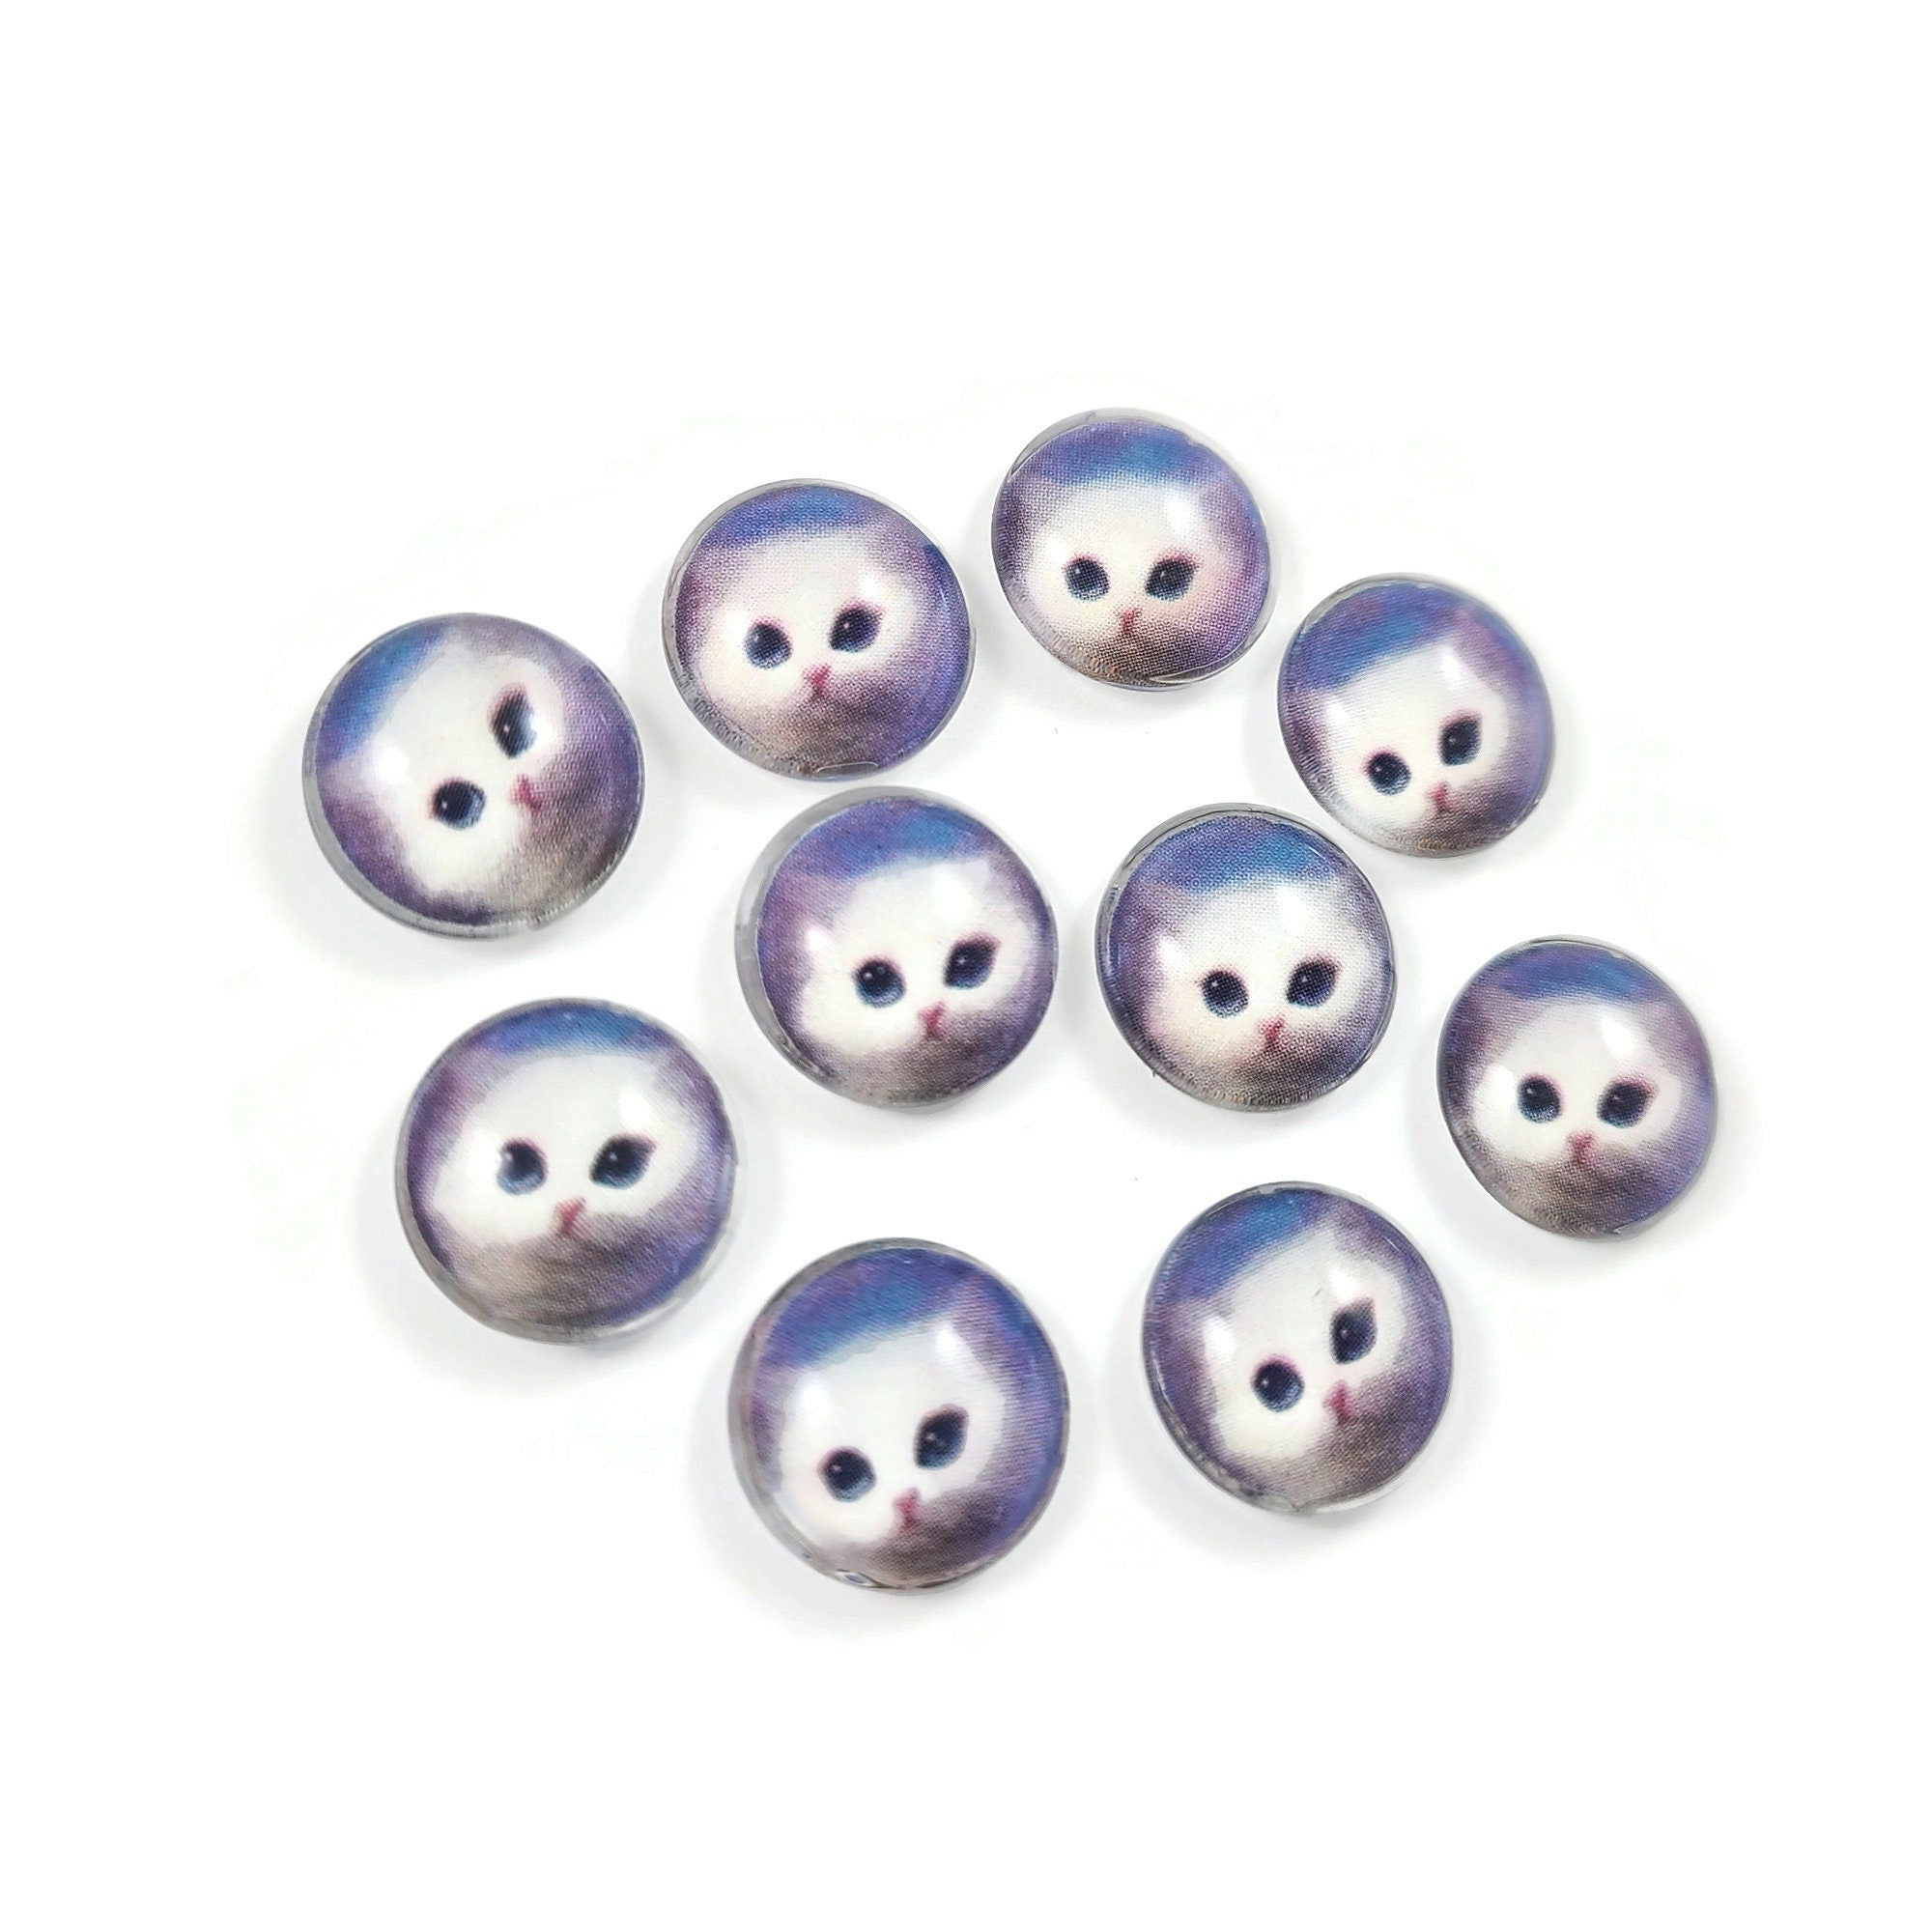 10 Cat glass cabochons, 12mm glass dome cabochon, Jewelry making supplies